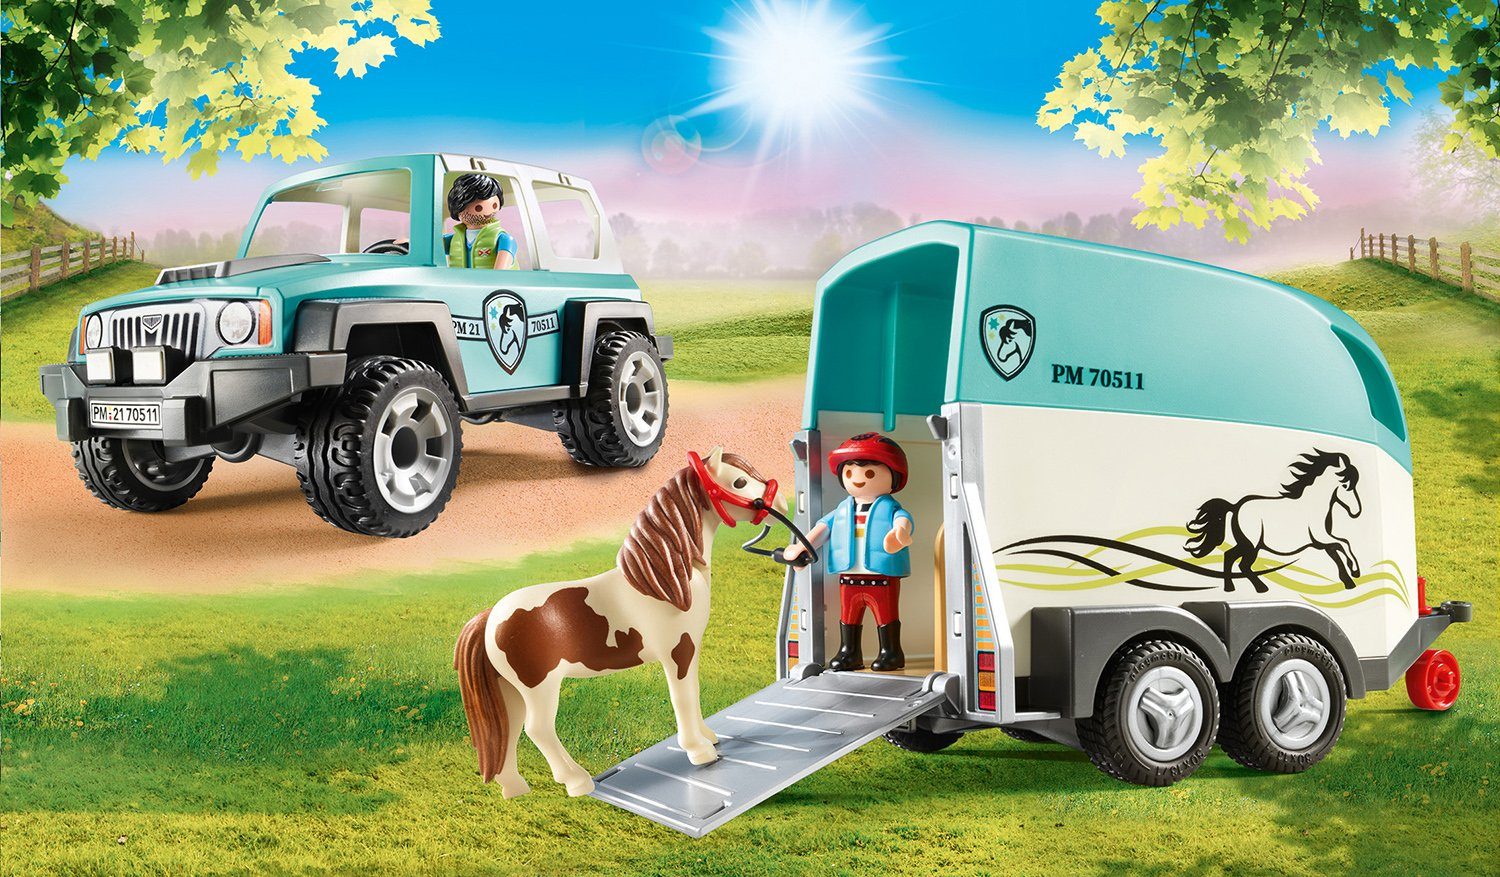 Ponyanhänger Konstruktions-Spielset Playmobil® (70511), Country, (44 Made Germany mit PKW in St),